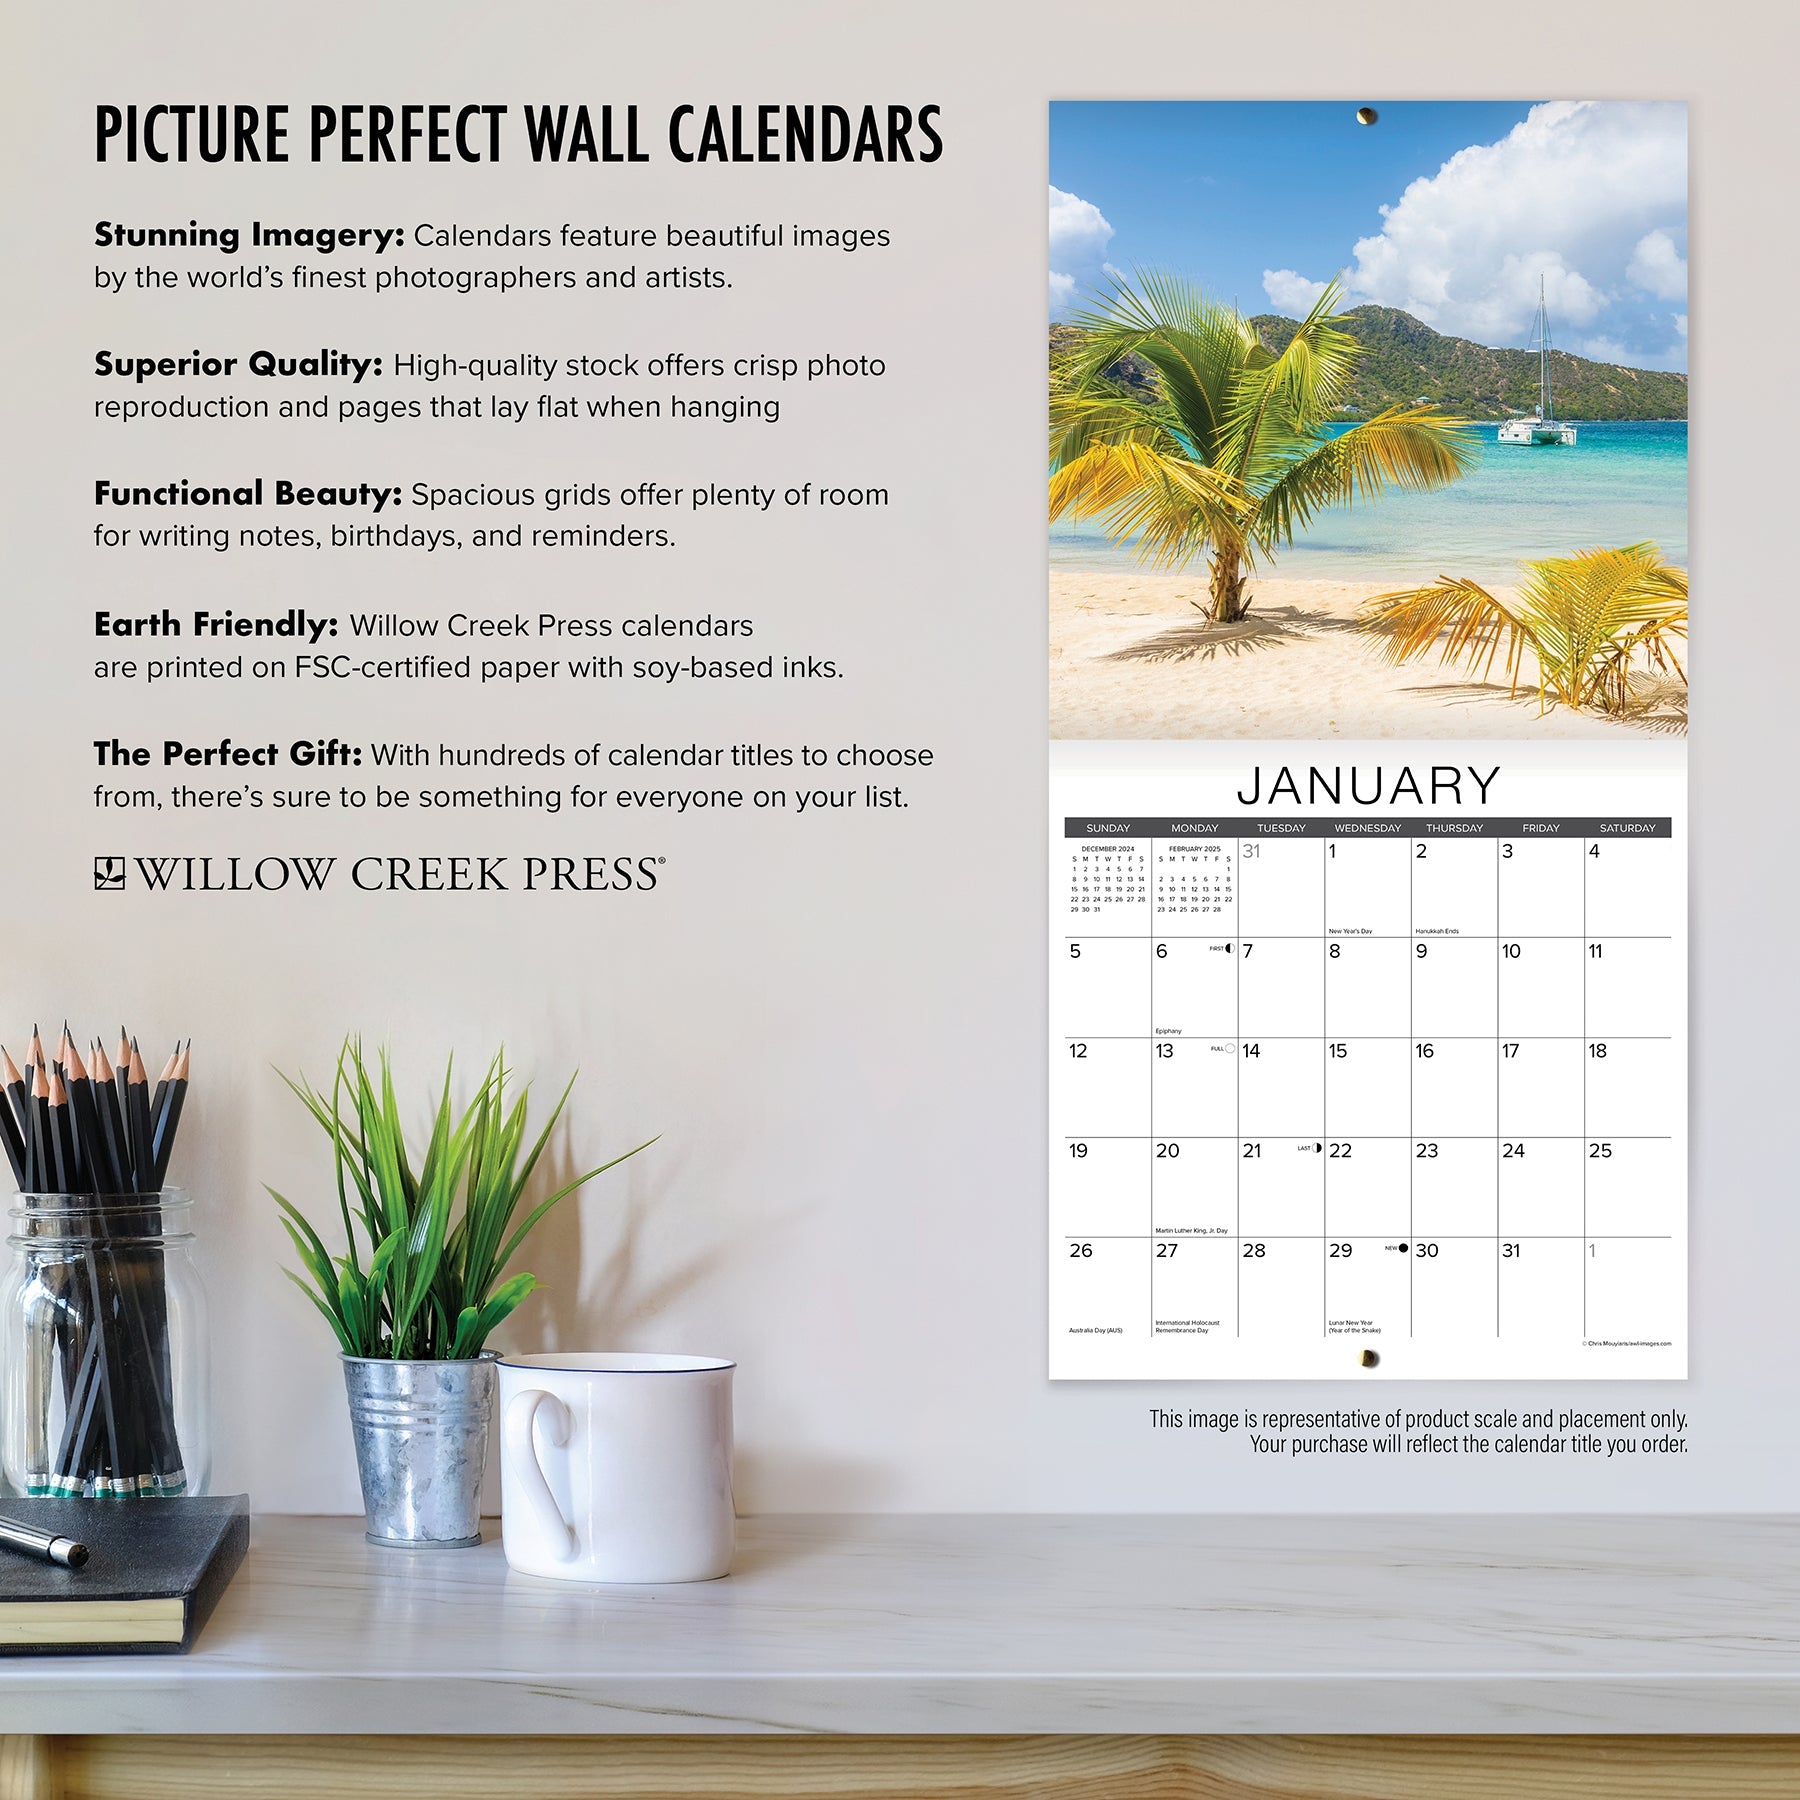 2025 Make Every Day Your Bitch - Square Wall Calendar (US Only)